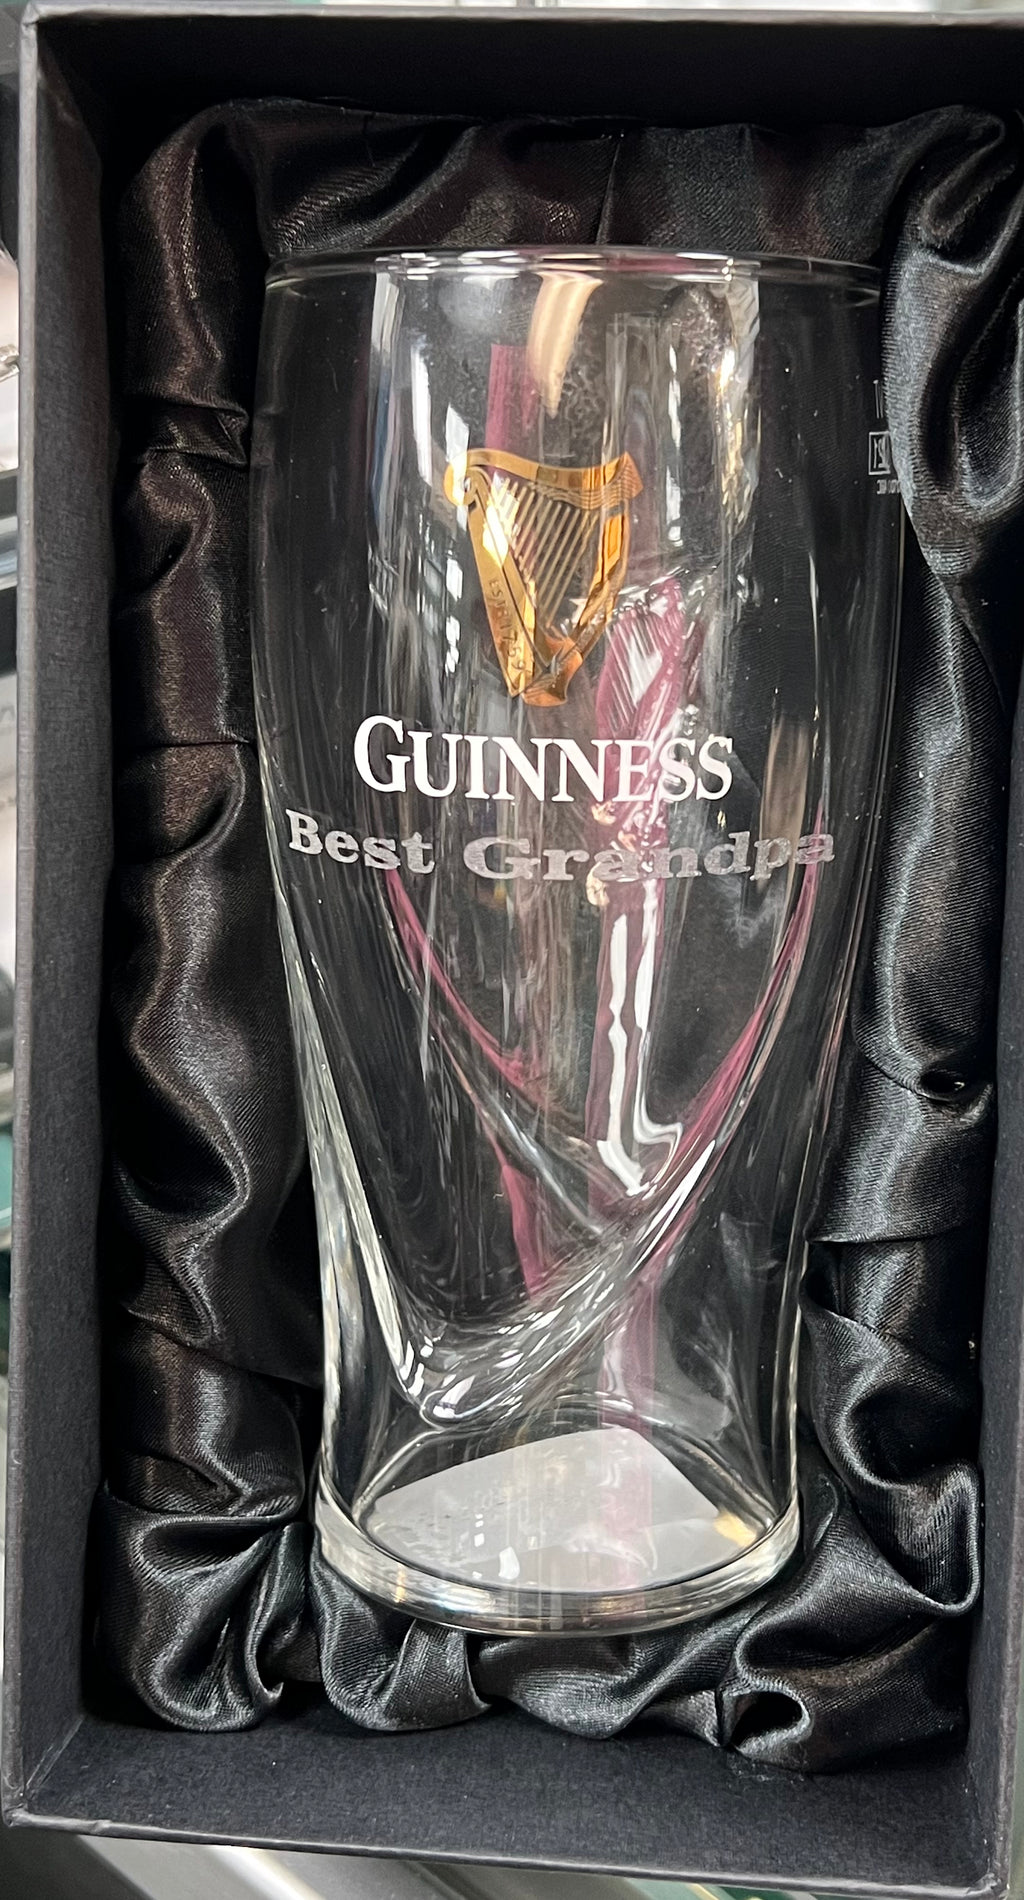 Guinness Pint “best Grandpa” etched